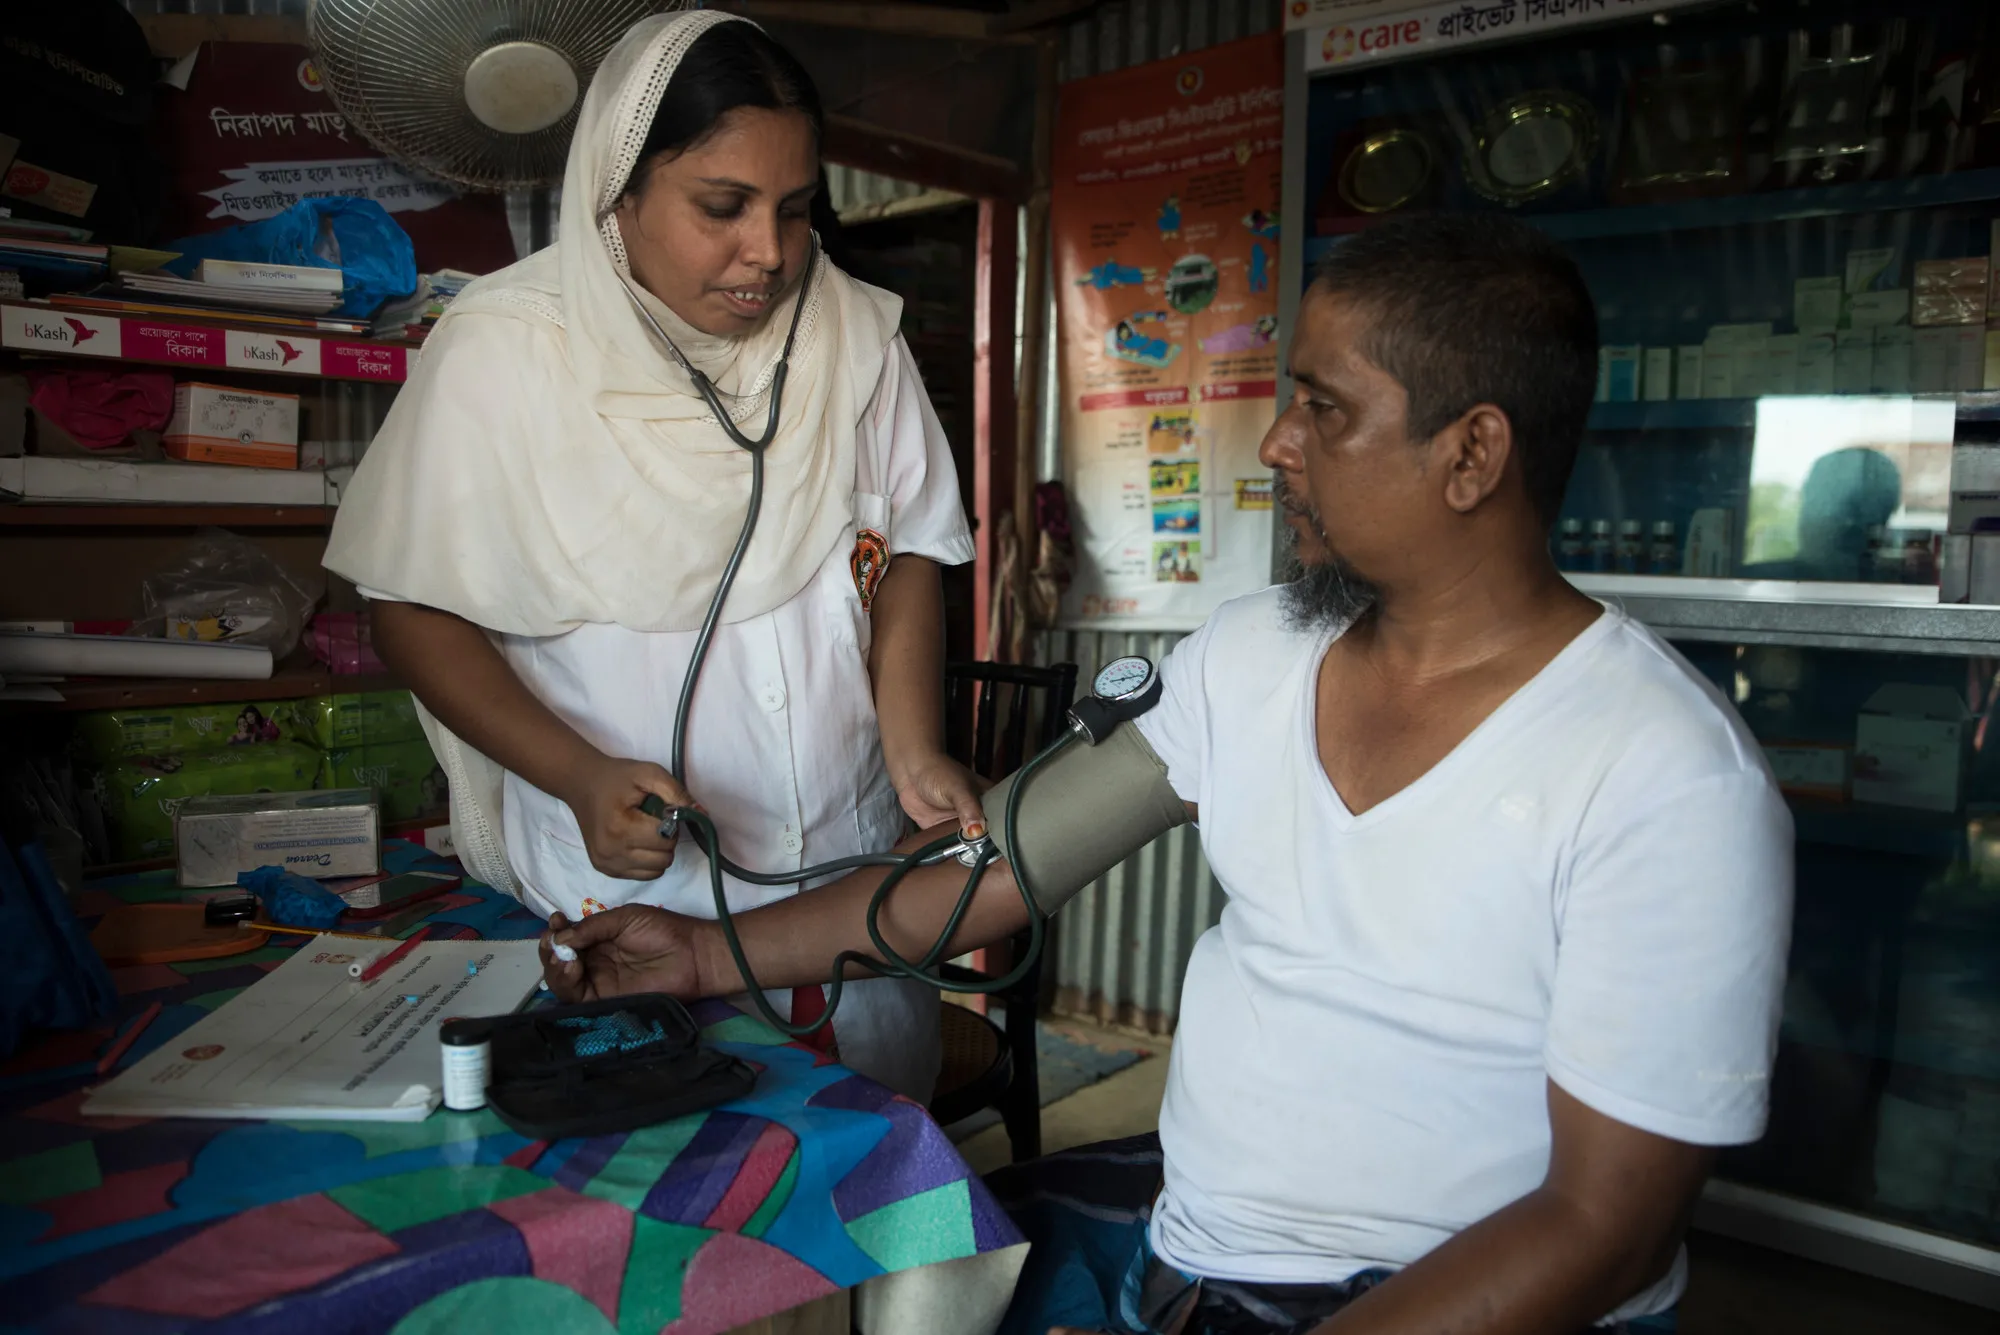 Frontline community health worker providing essential services in Bangladesh